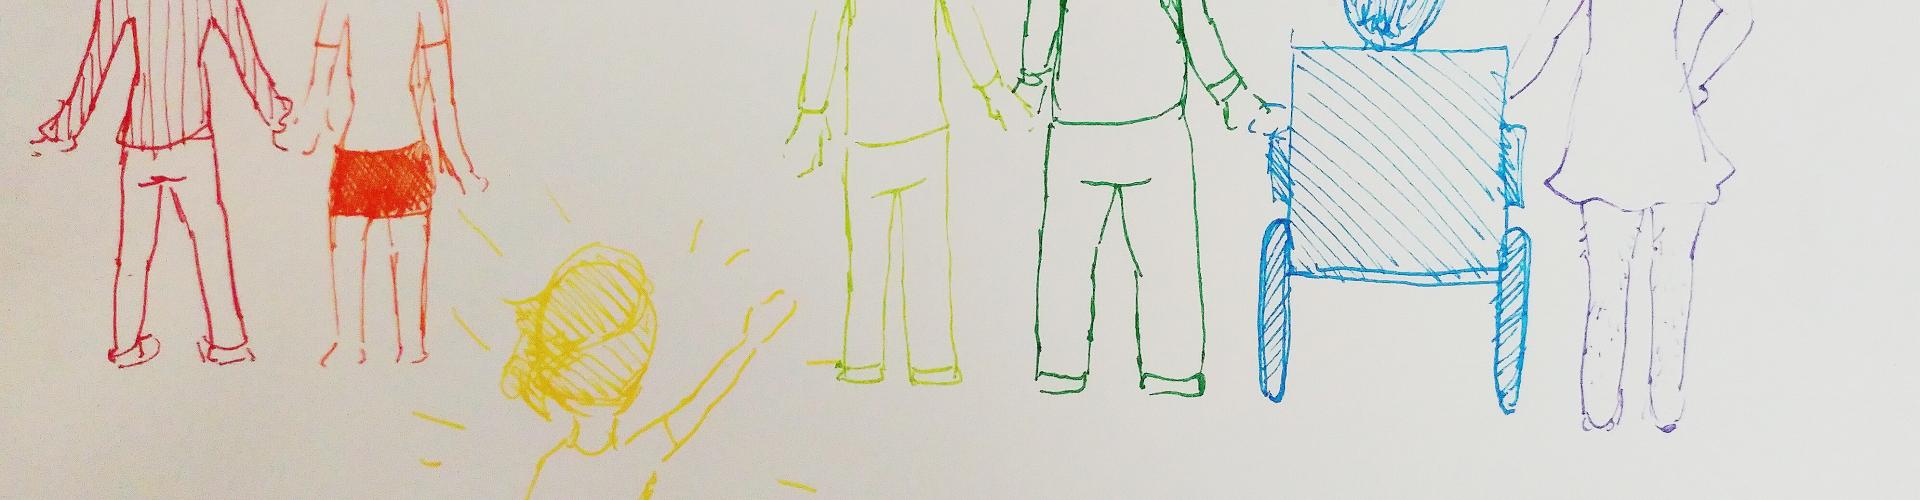 Drawing of people as different colors of the rainbow.